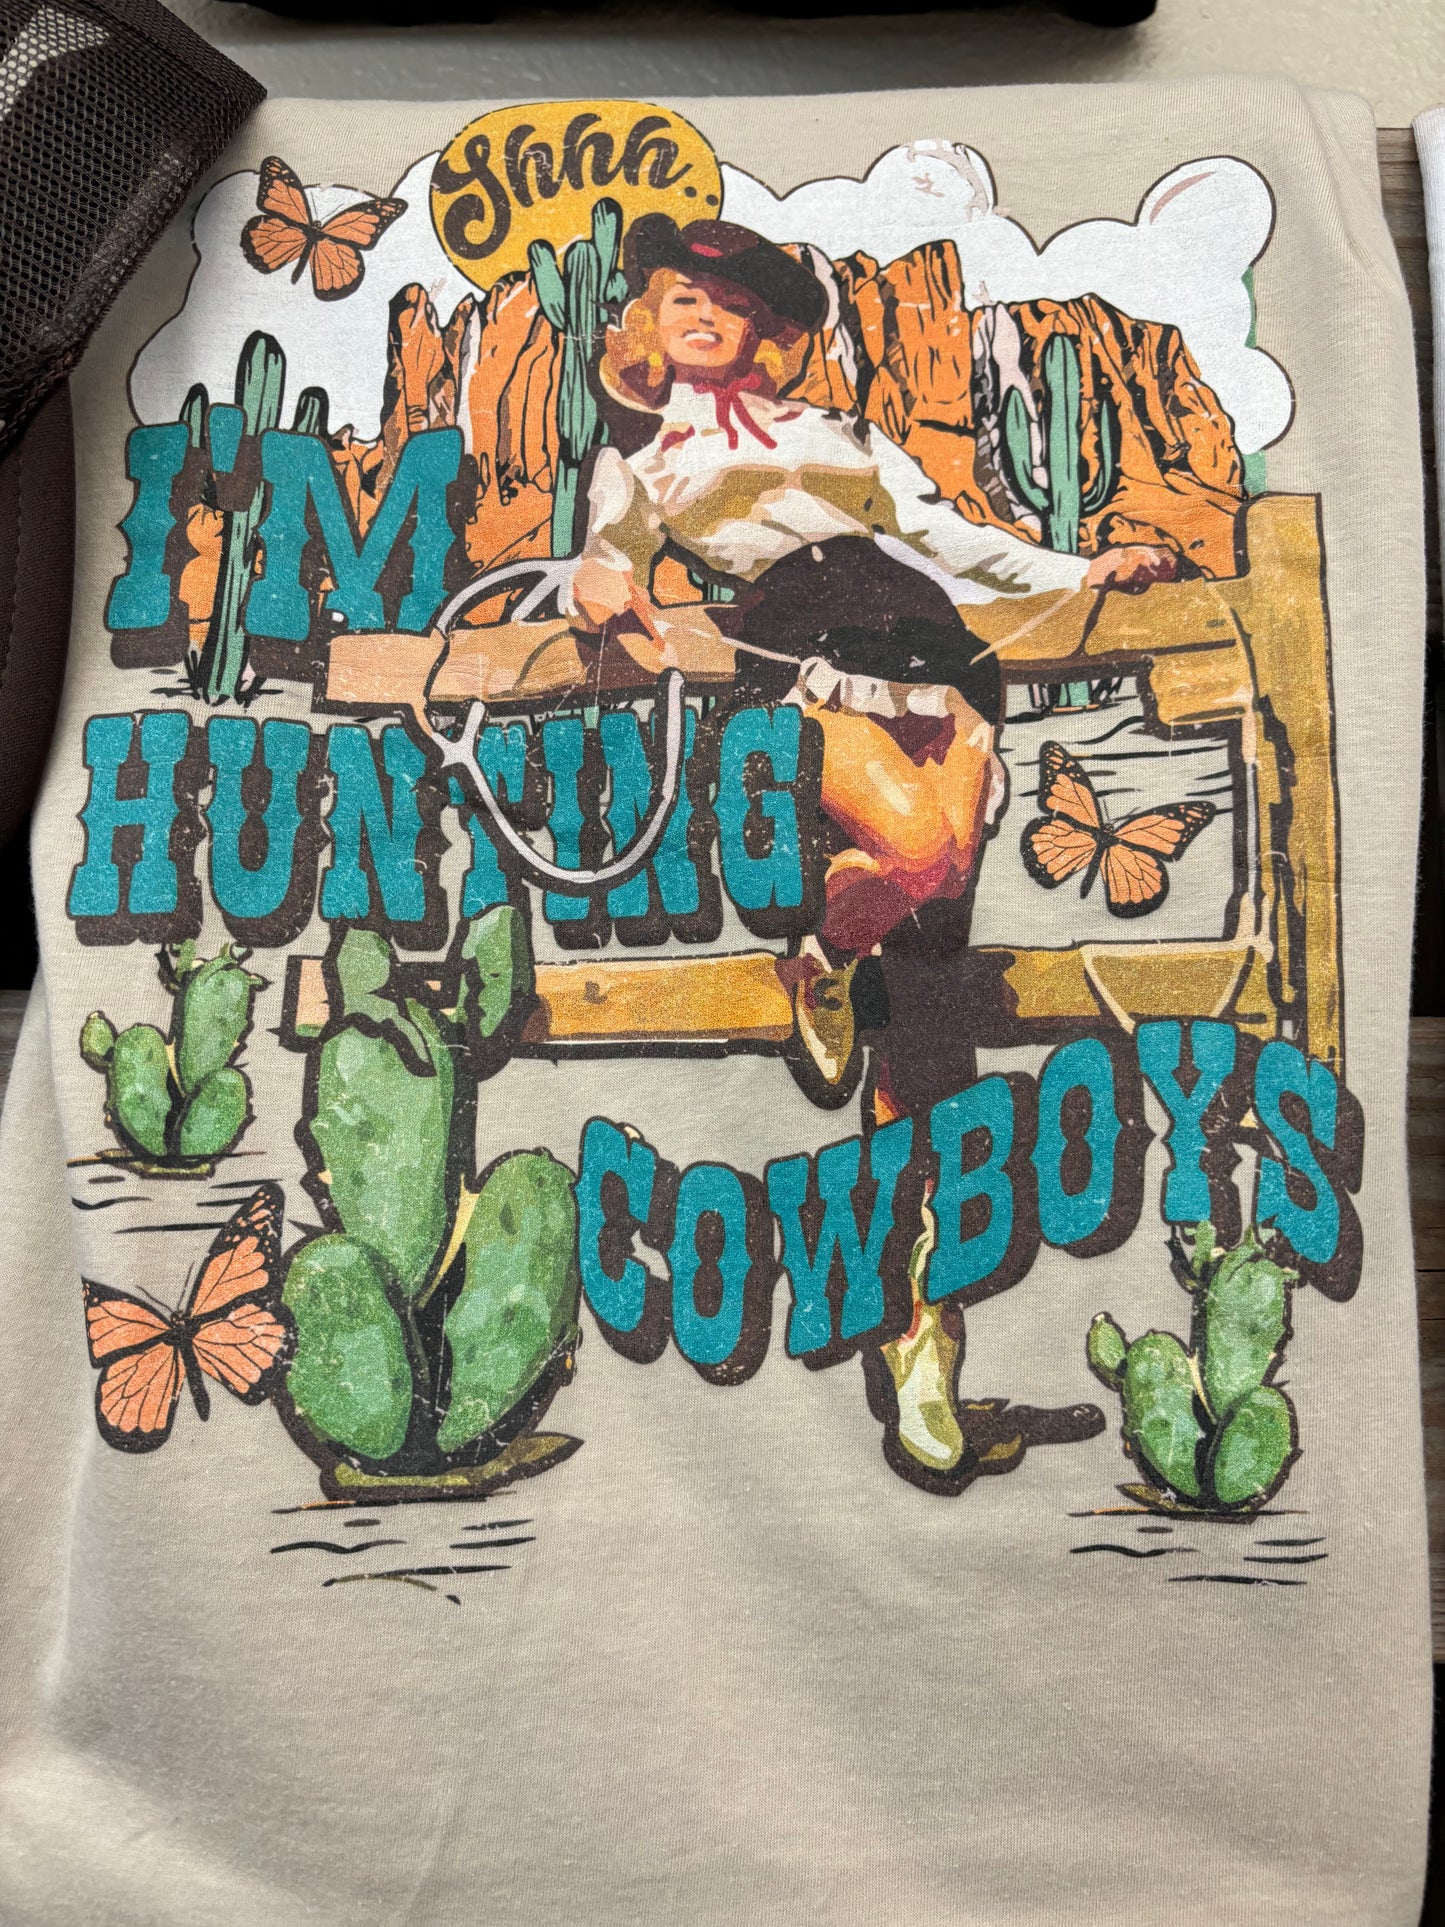 The Hunting Cowboys Graphic Tee